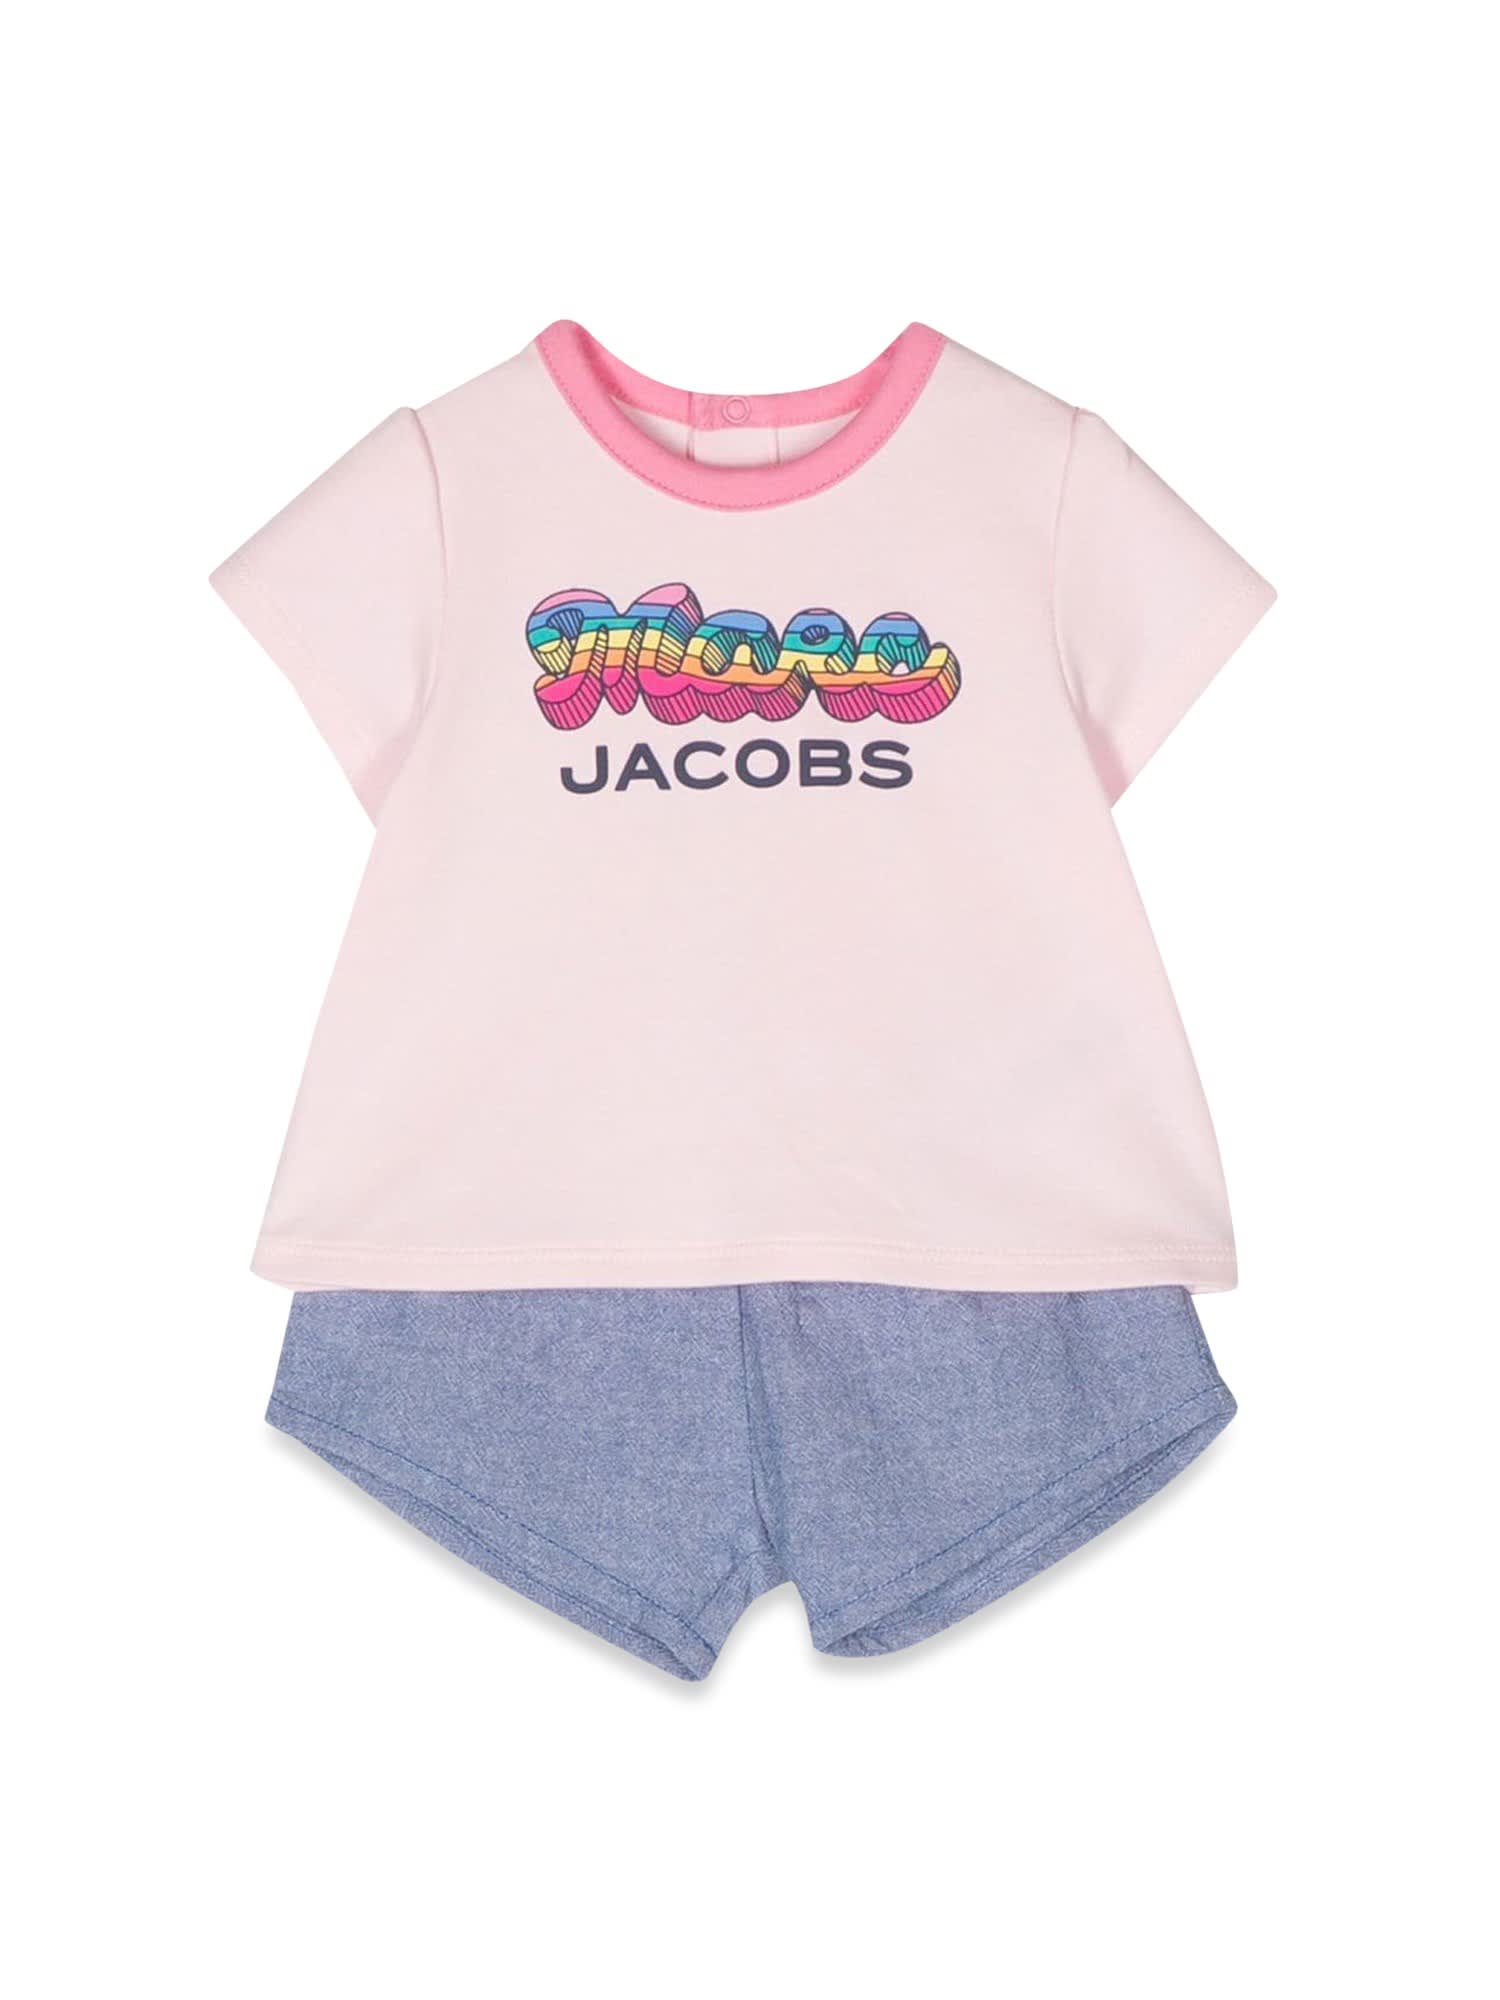 MARC JACOBS MULTICOLOR LOGO T-SHIRT AND SHORTS